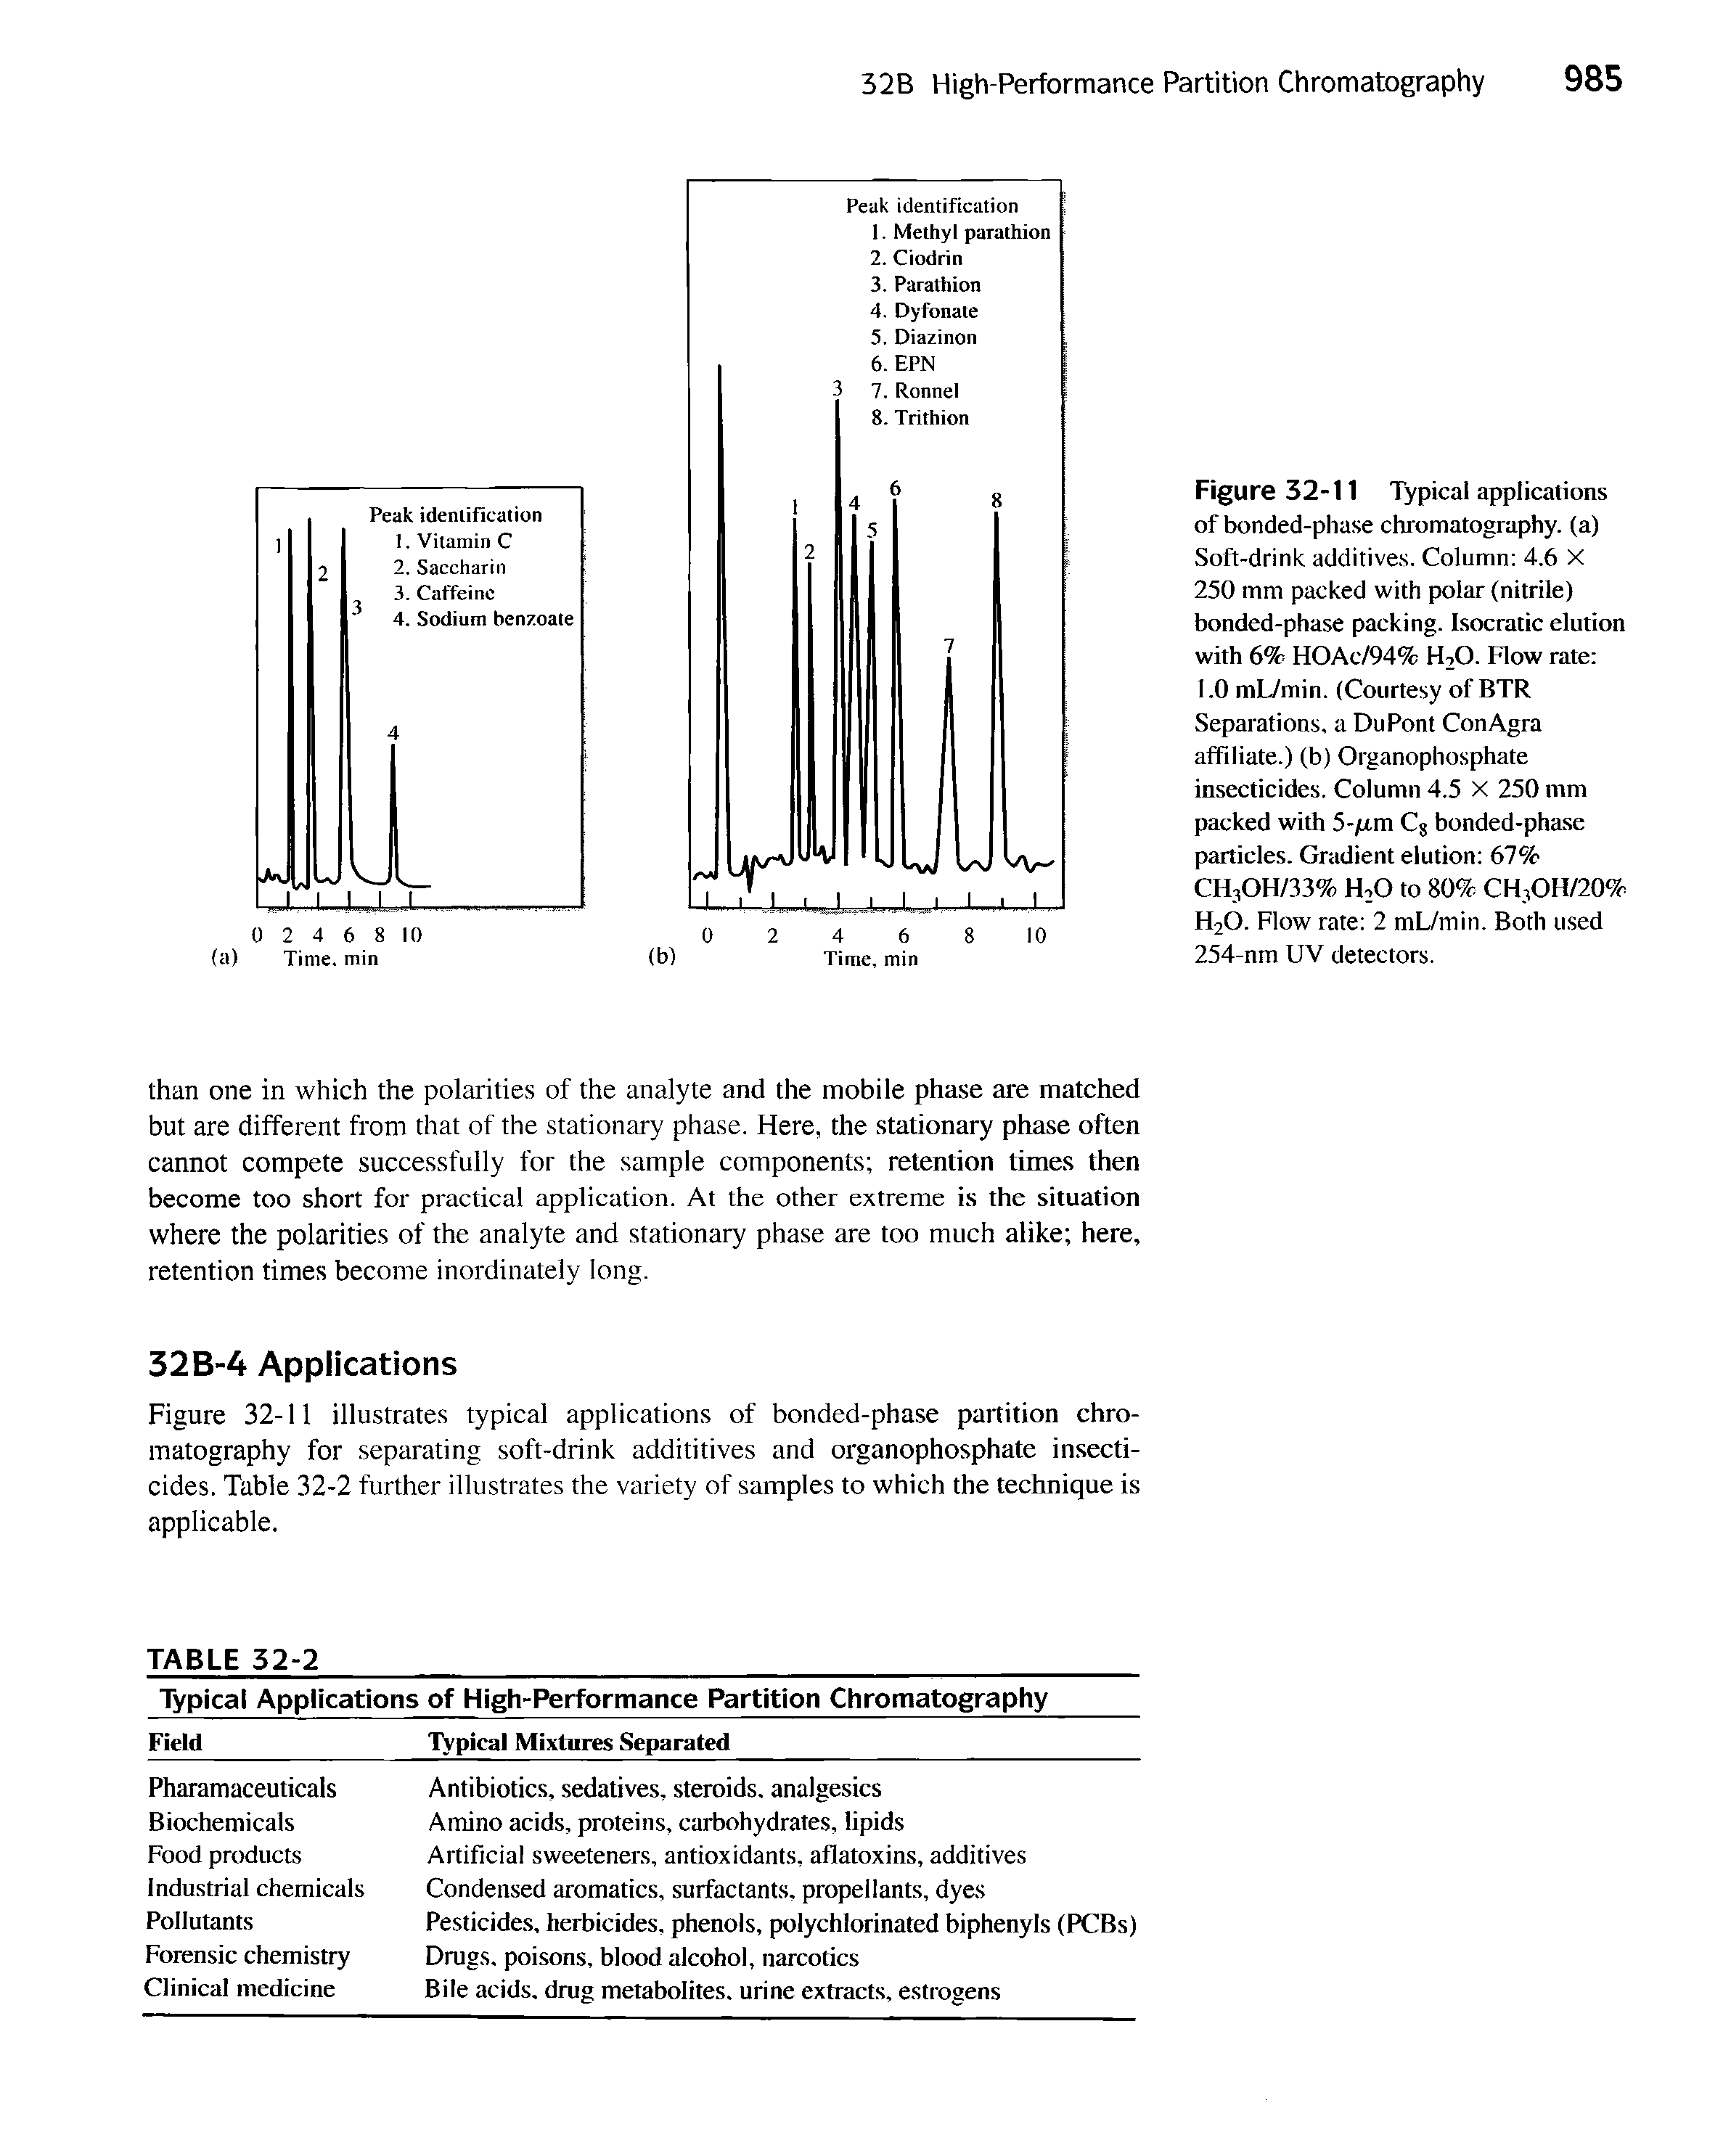 Figure 32-11 Typical applications of bonded-phase chromatography, (a) Soft-drink additives. Column 4.6 X 250 mm packed with polar (nitrile) bonded-phase packing. Isocratic elution with 6% HOAc/94% H,0. Flow rate 1.0 mL/min. (Courtesy of BTR Separations, a DuPont ConAgra affiliate.) (b) Organophosphate insecticides. Column 4.5 X 250 mm packed with 5-/xm Cj bonded-phase particles. Gradient elution 67% CH30H/33% H.O to 80% CH,OH/20% H2O. Flow rate 2 mL/min. Both used 254-nm UV detectors.